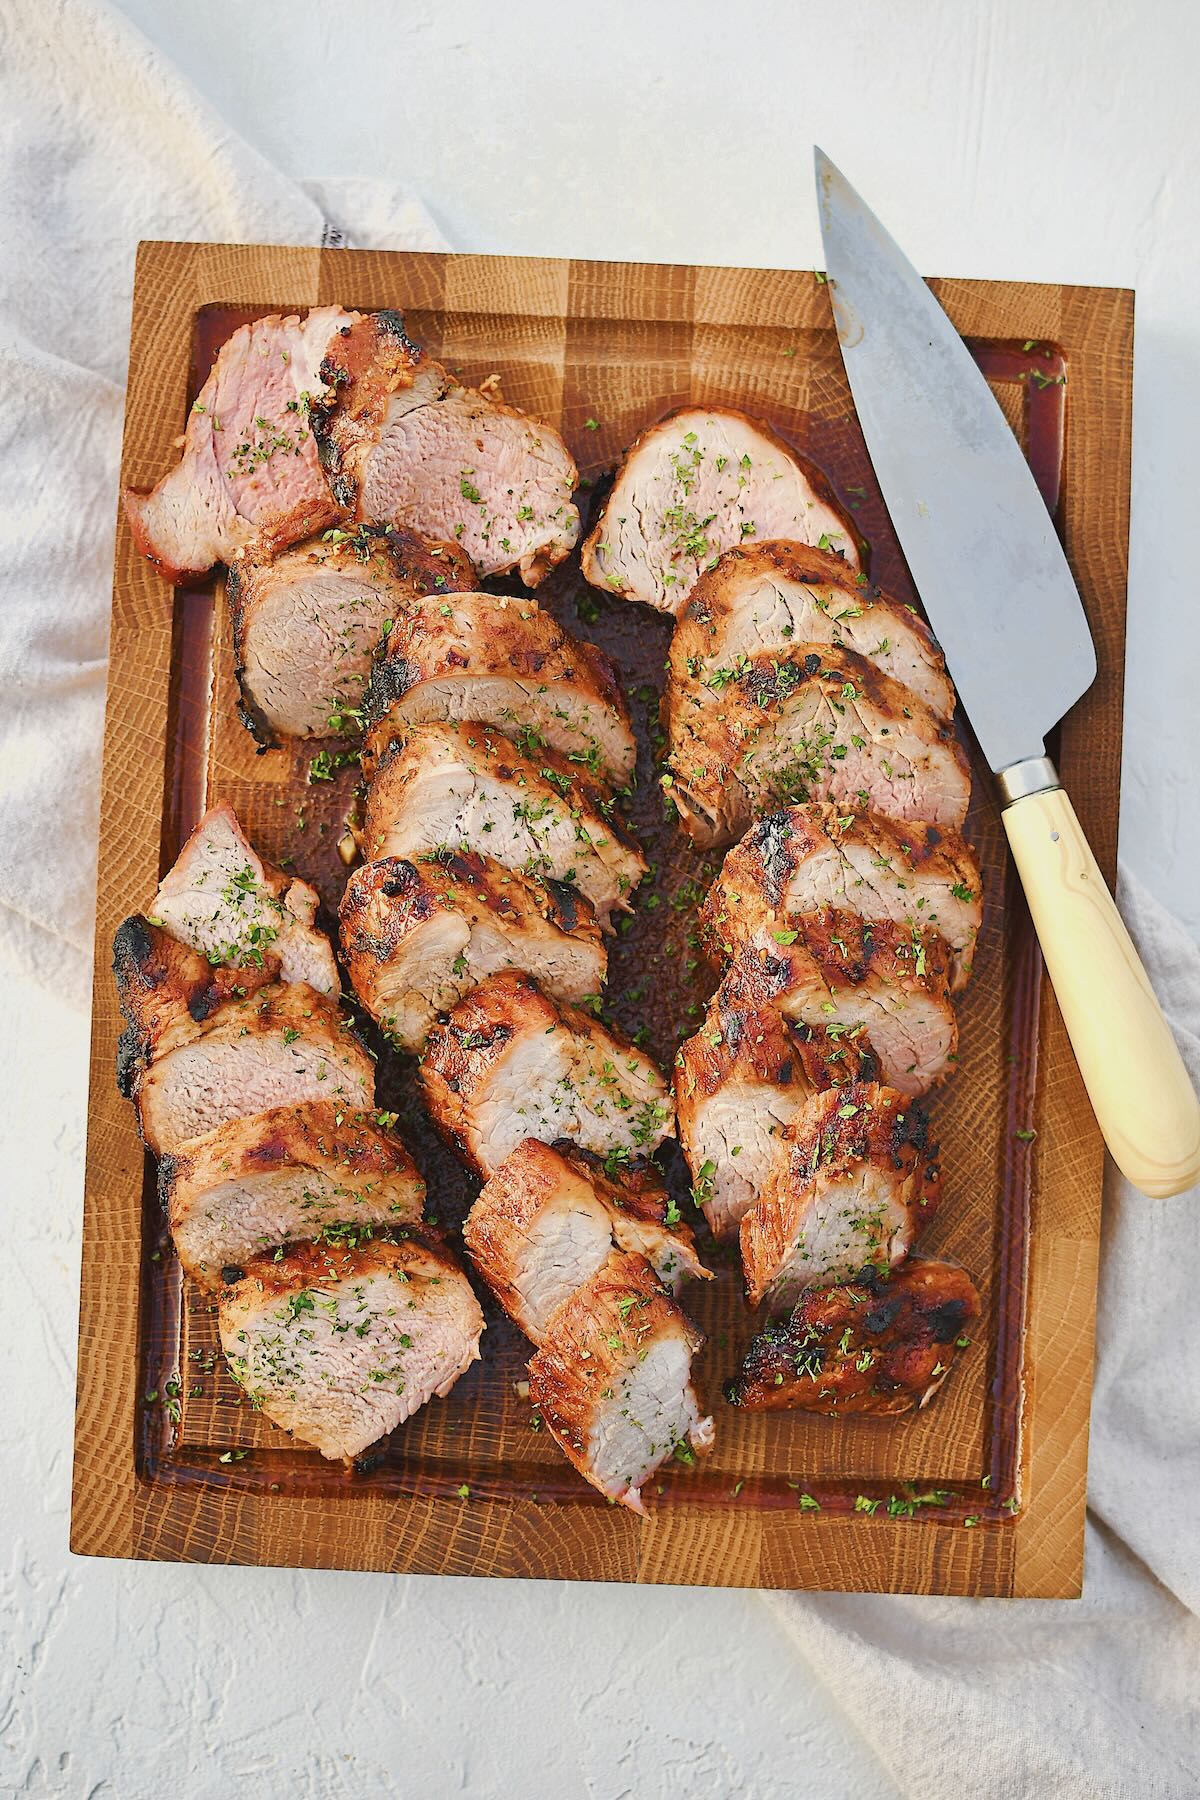 Grilled Pork Tenderloin sliced and resting on a cutting board with the knife on the side.